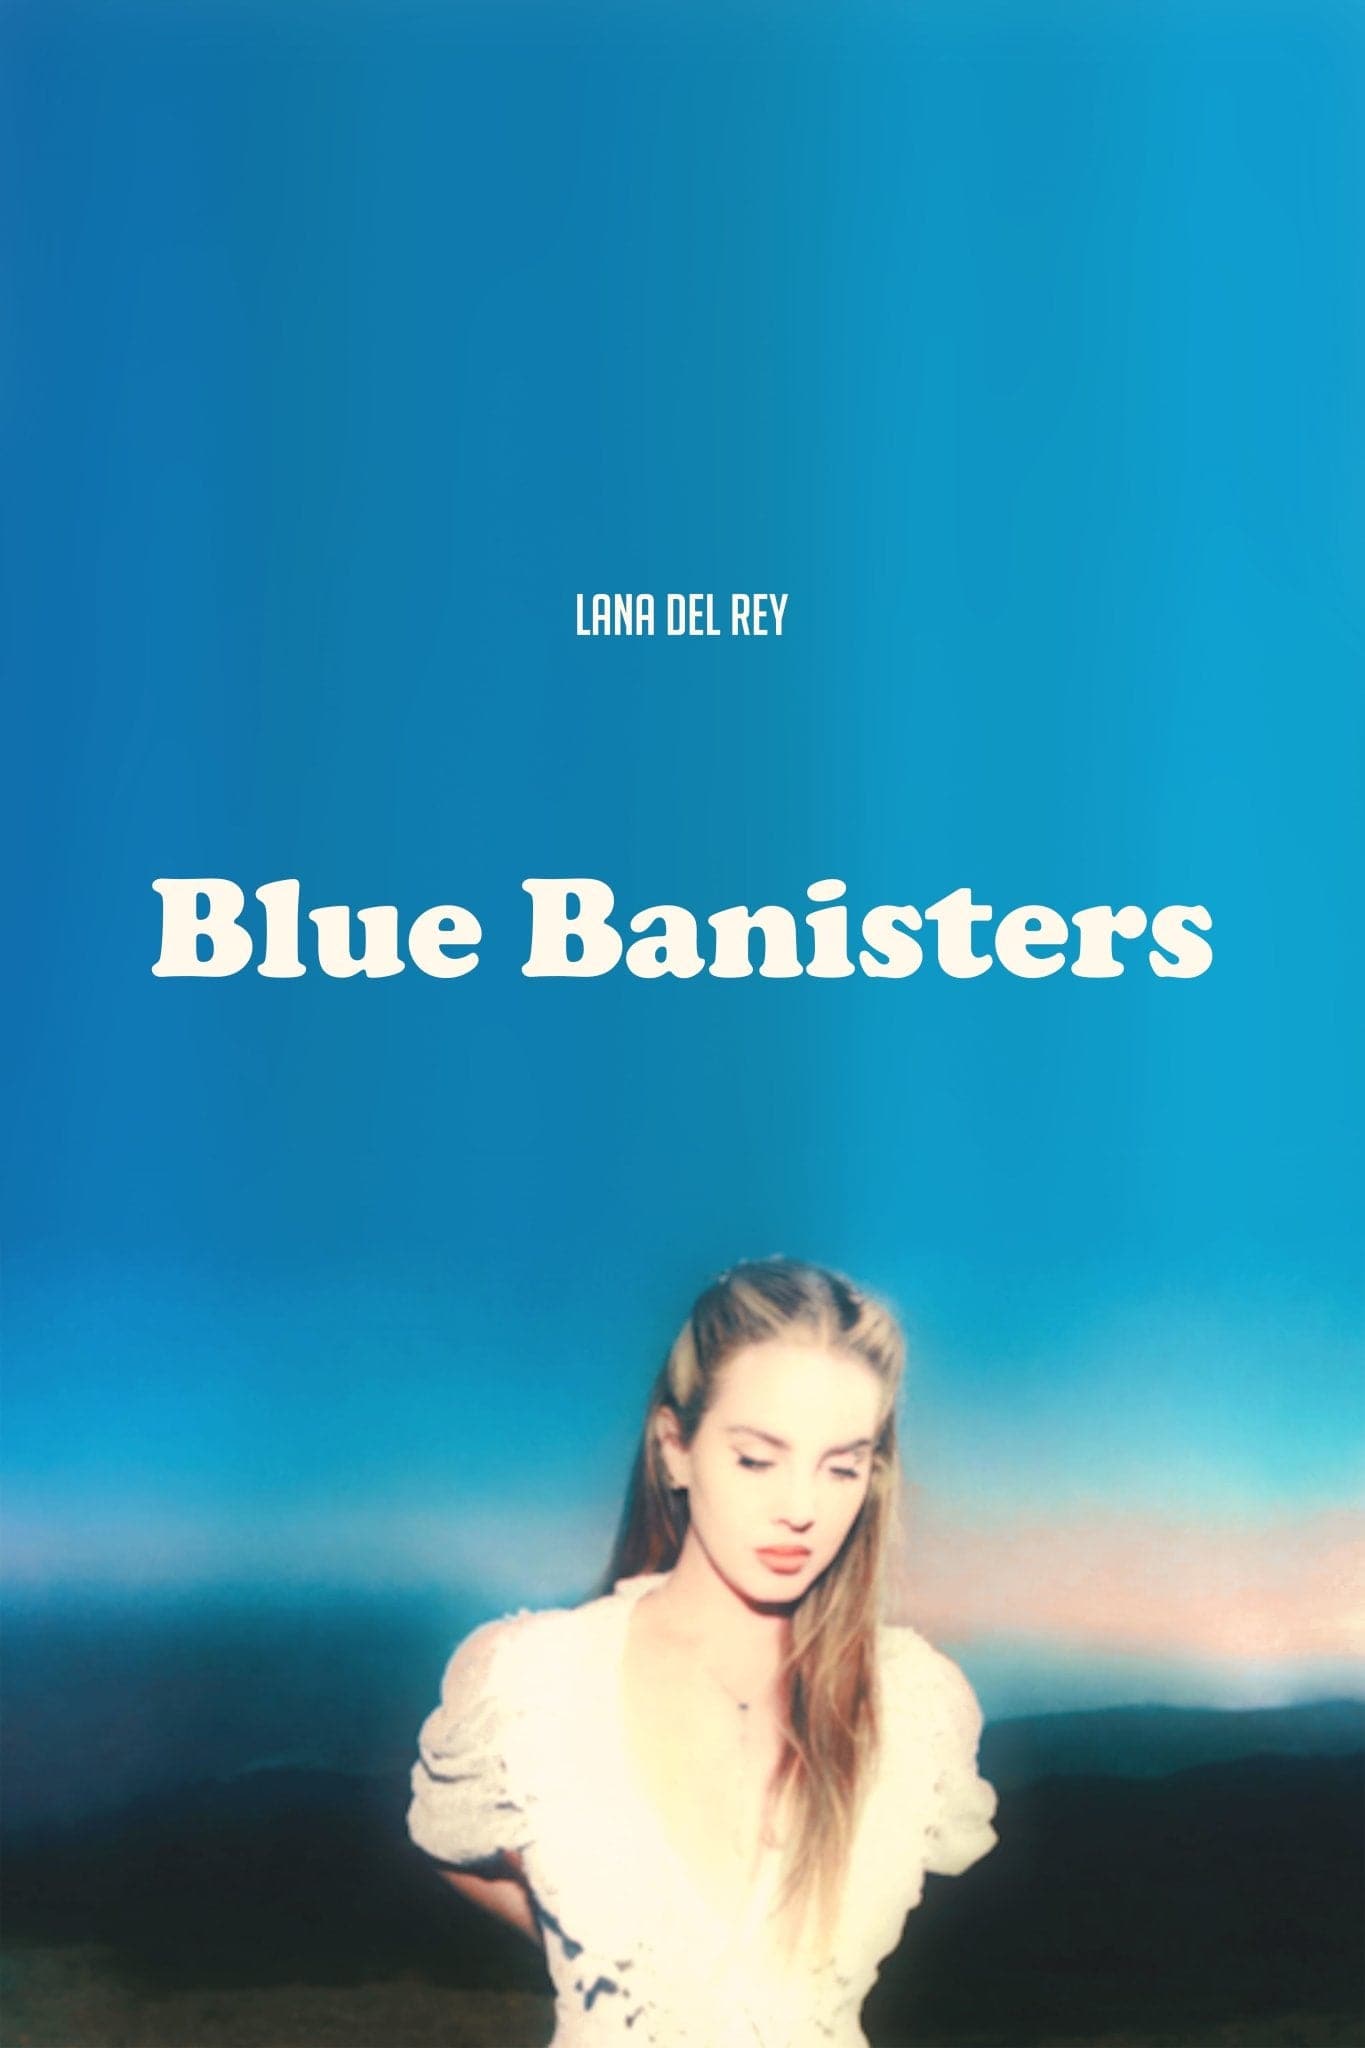 Lana Del Rey ‘Blue Banisters’ Poster - Posters Plug